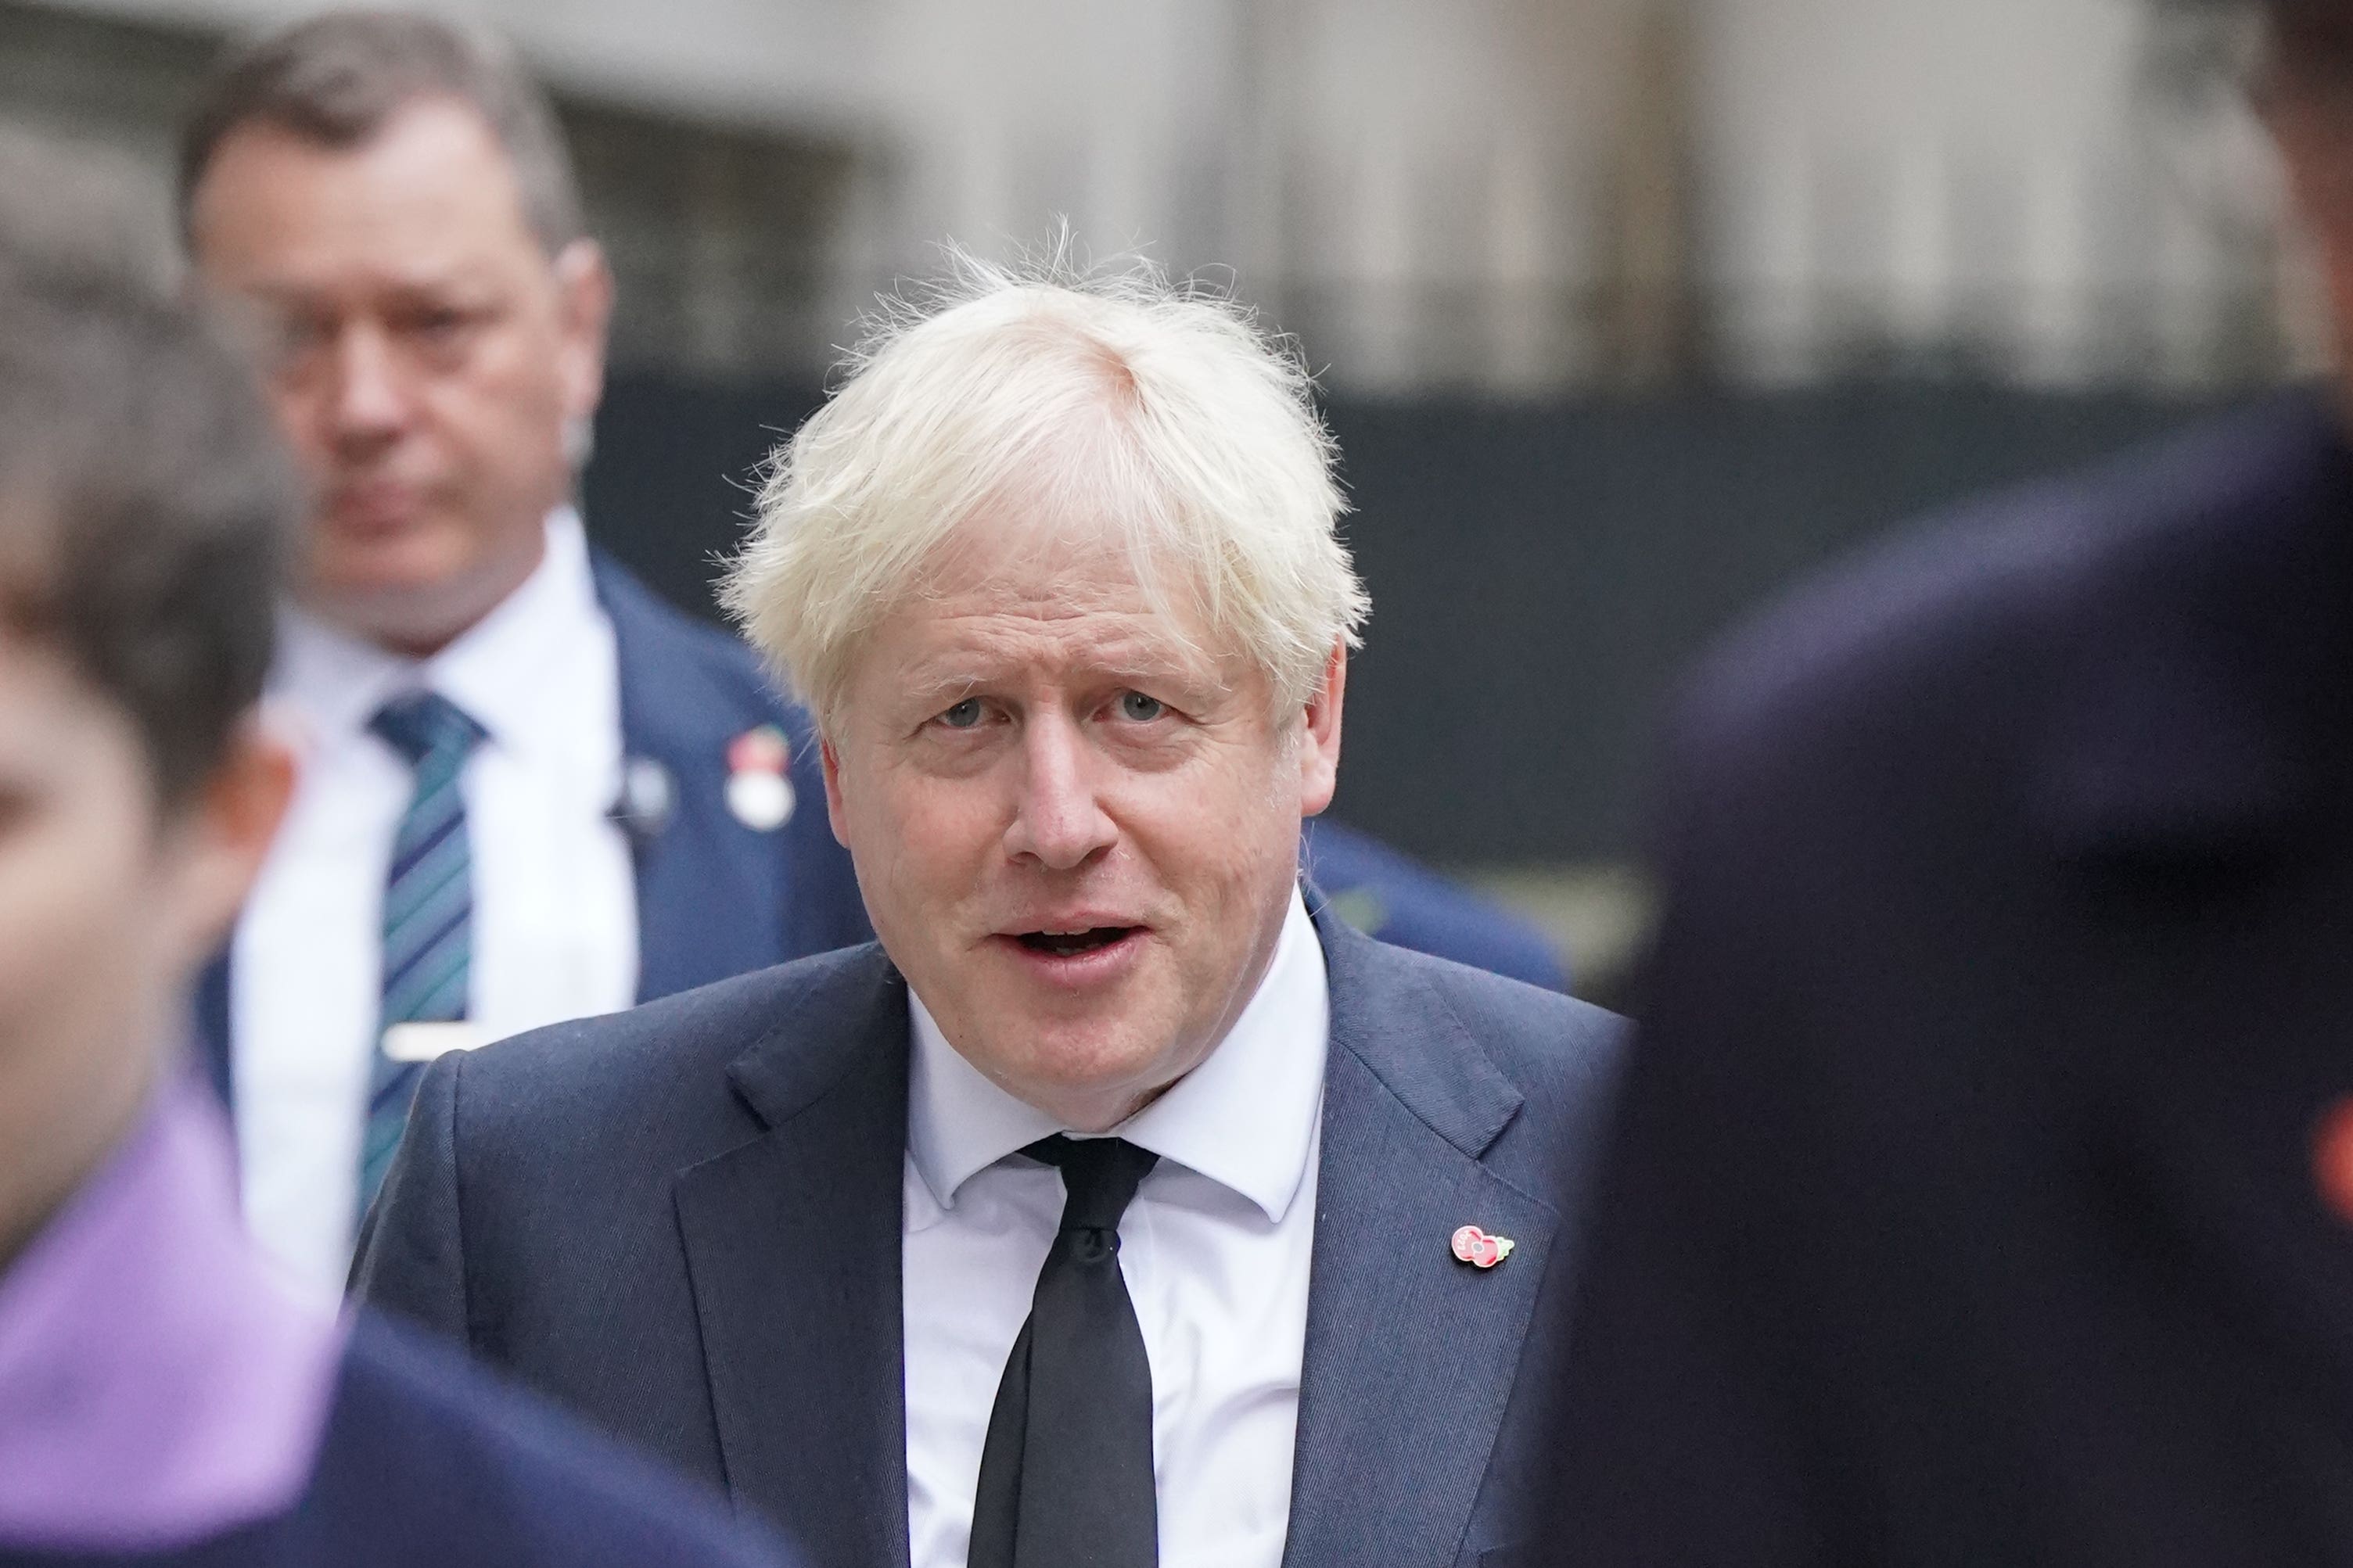 Former prime minister Boris Johnson has earned £2.3m on top of his salary as an MP in the past year